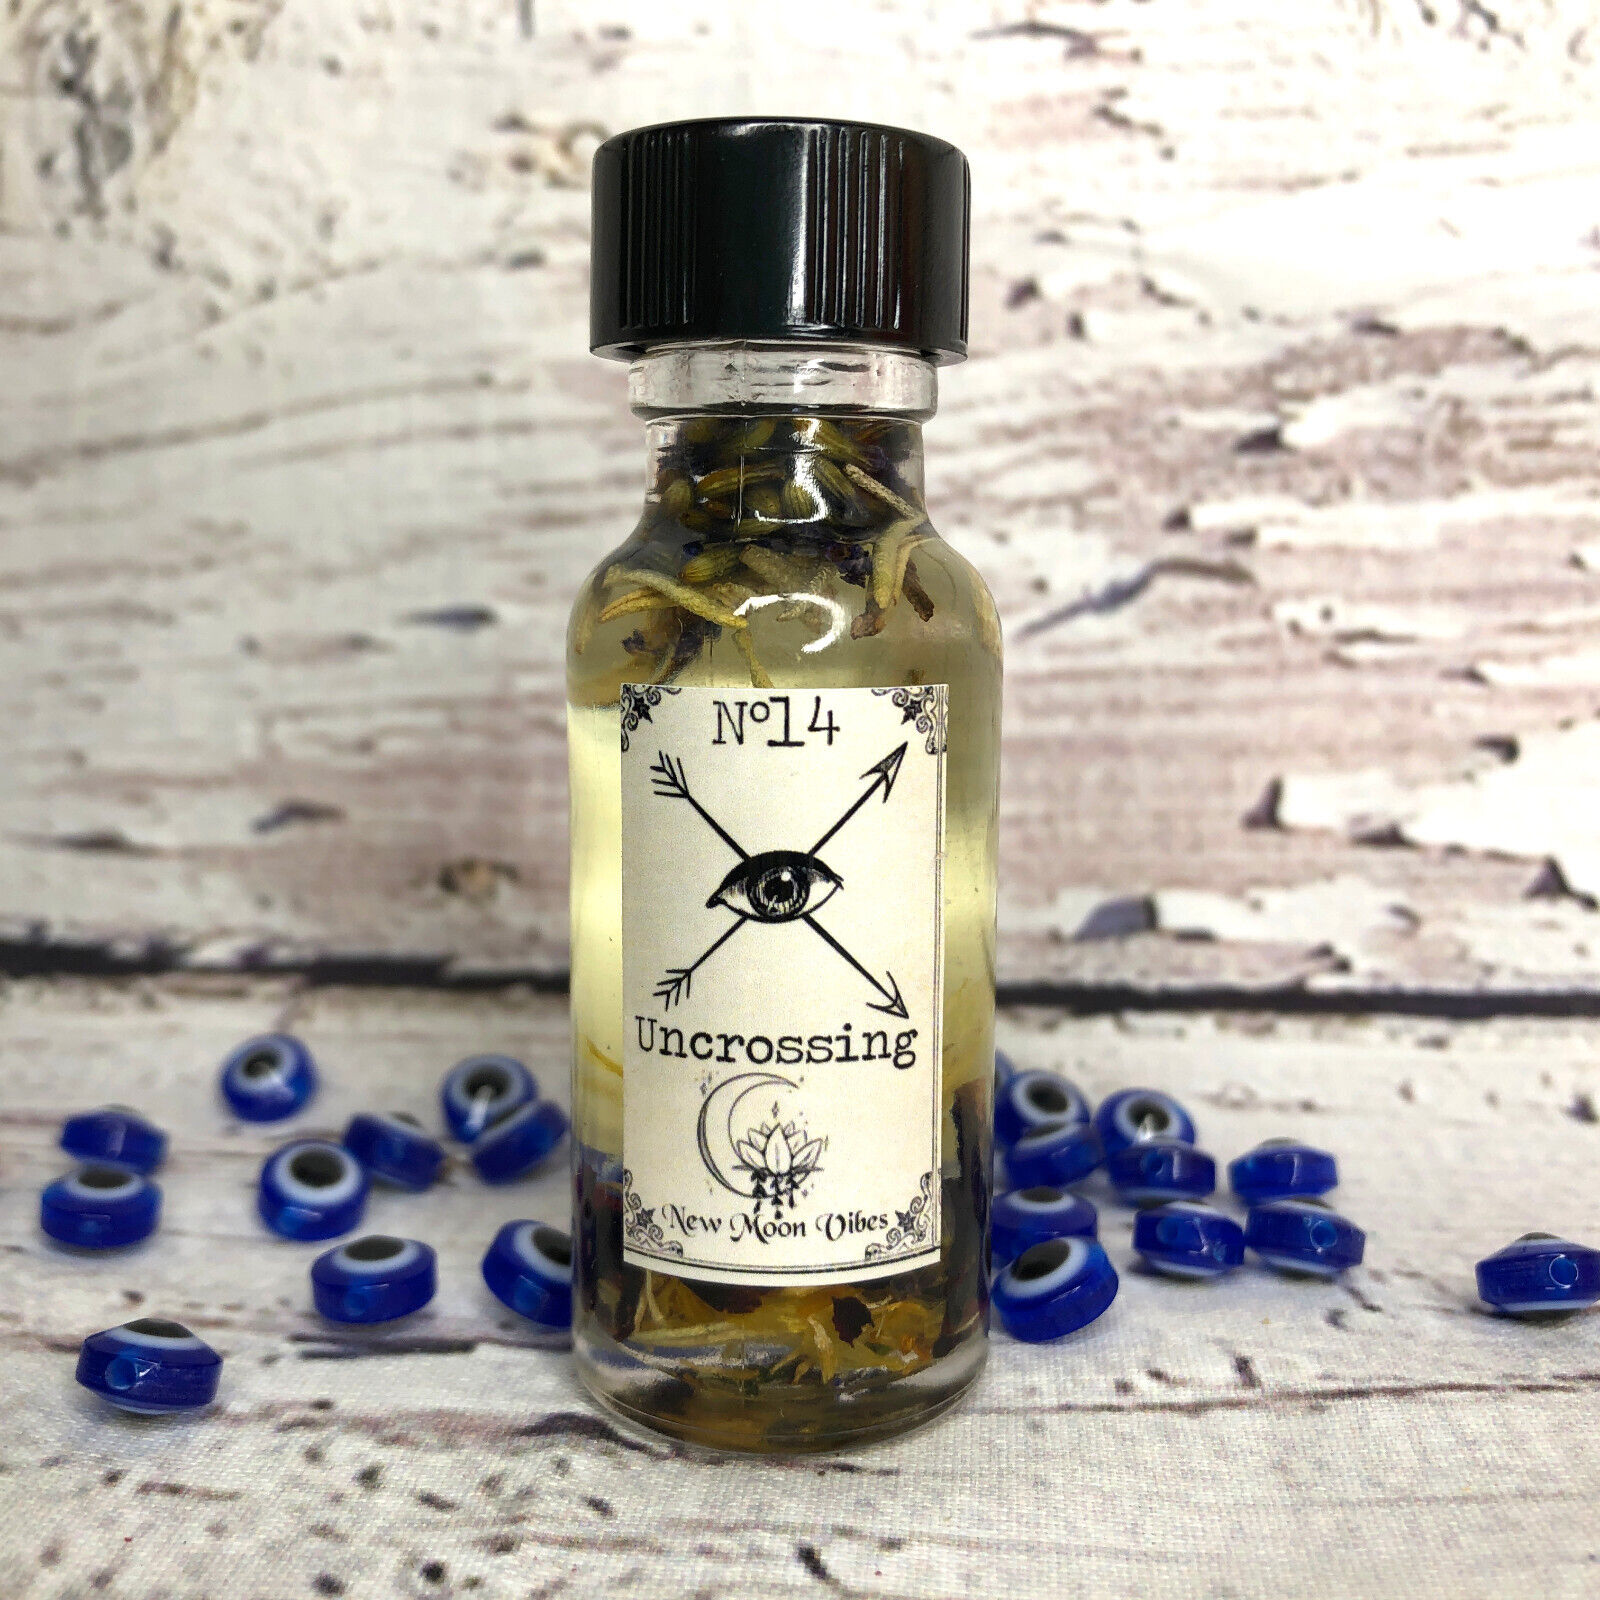 Uncrossing Oil Remove Evil Eye, Protection against Curse Hex Bad Luck Intentions